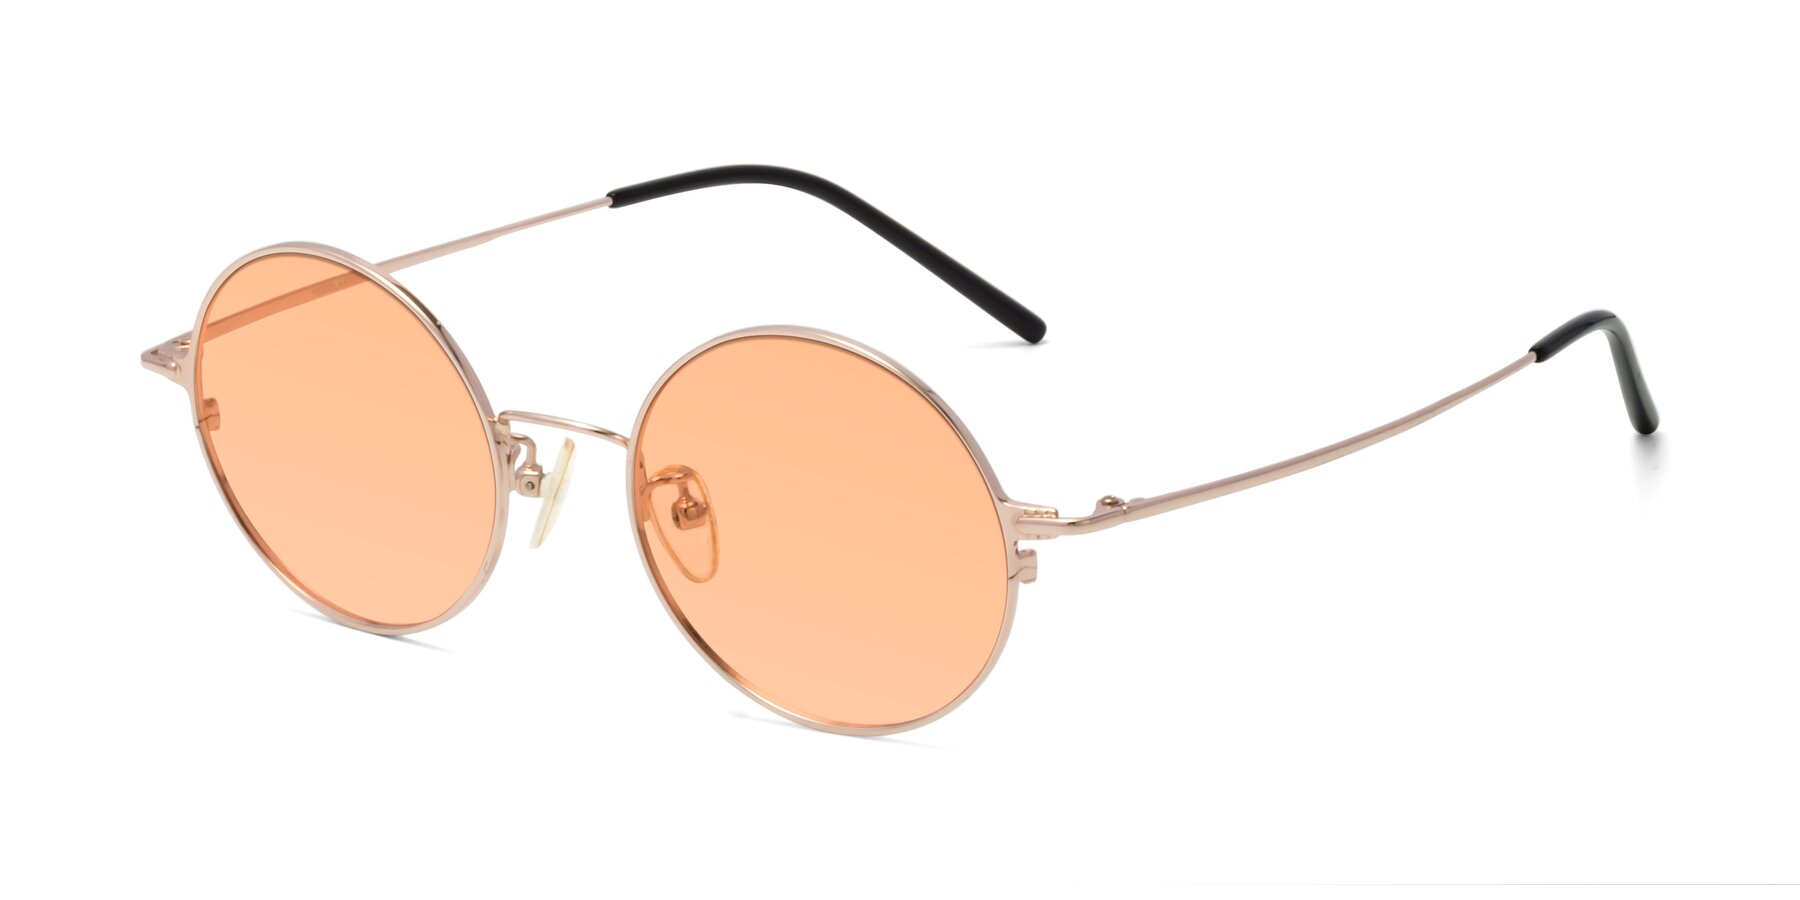 Angle of 18009 in Rose Gold with Light Orange Tinted Lenses